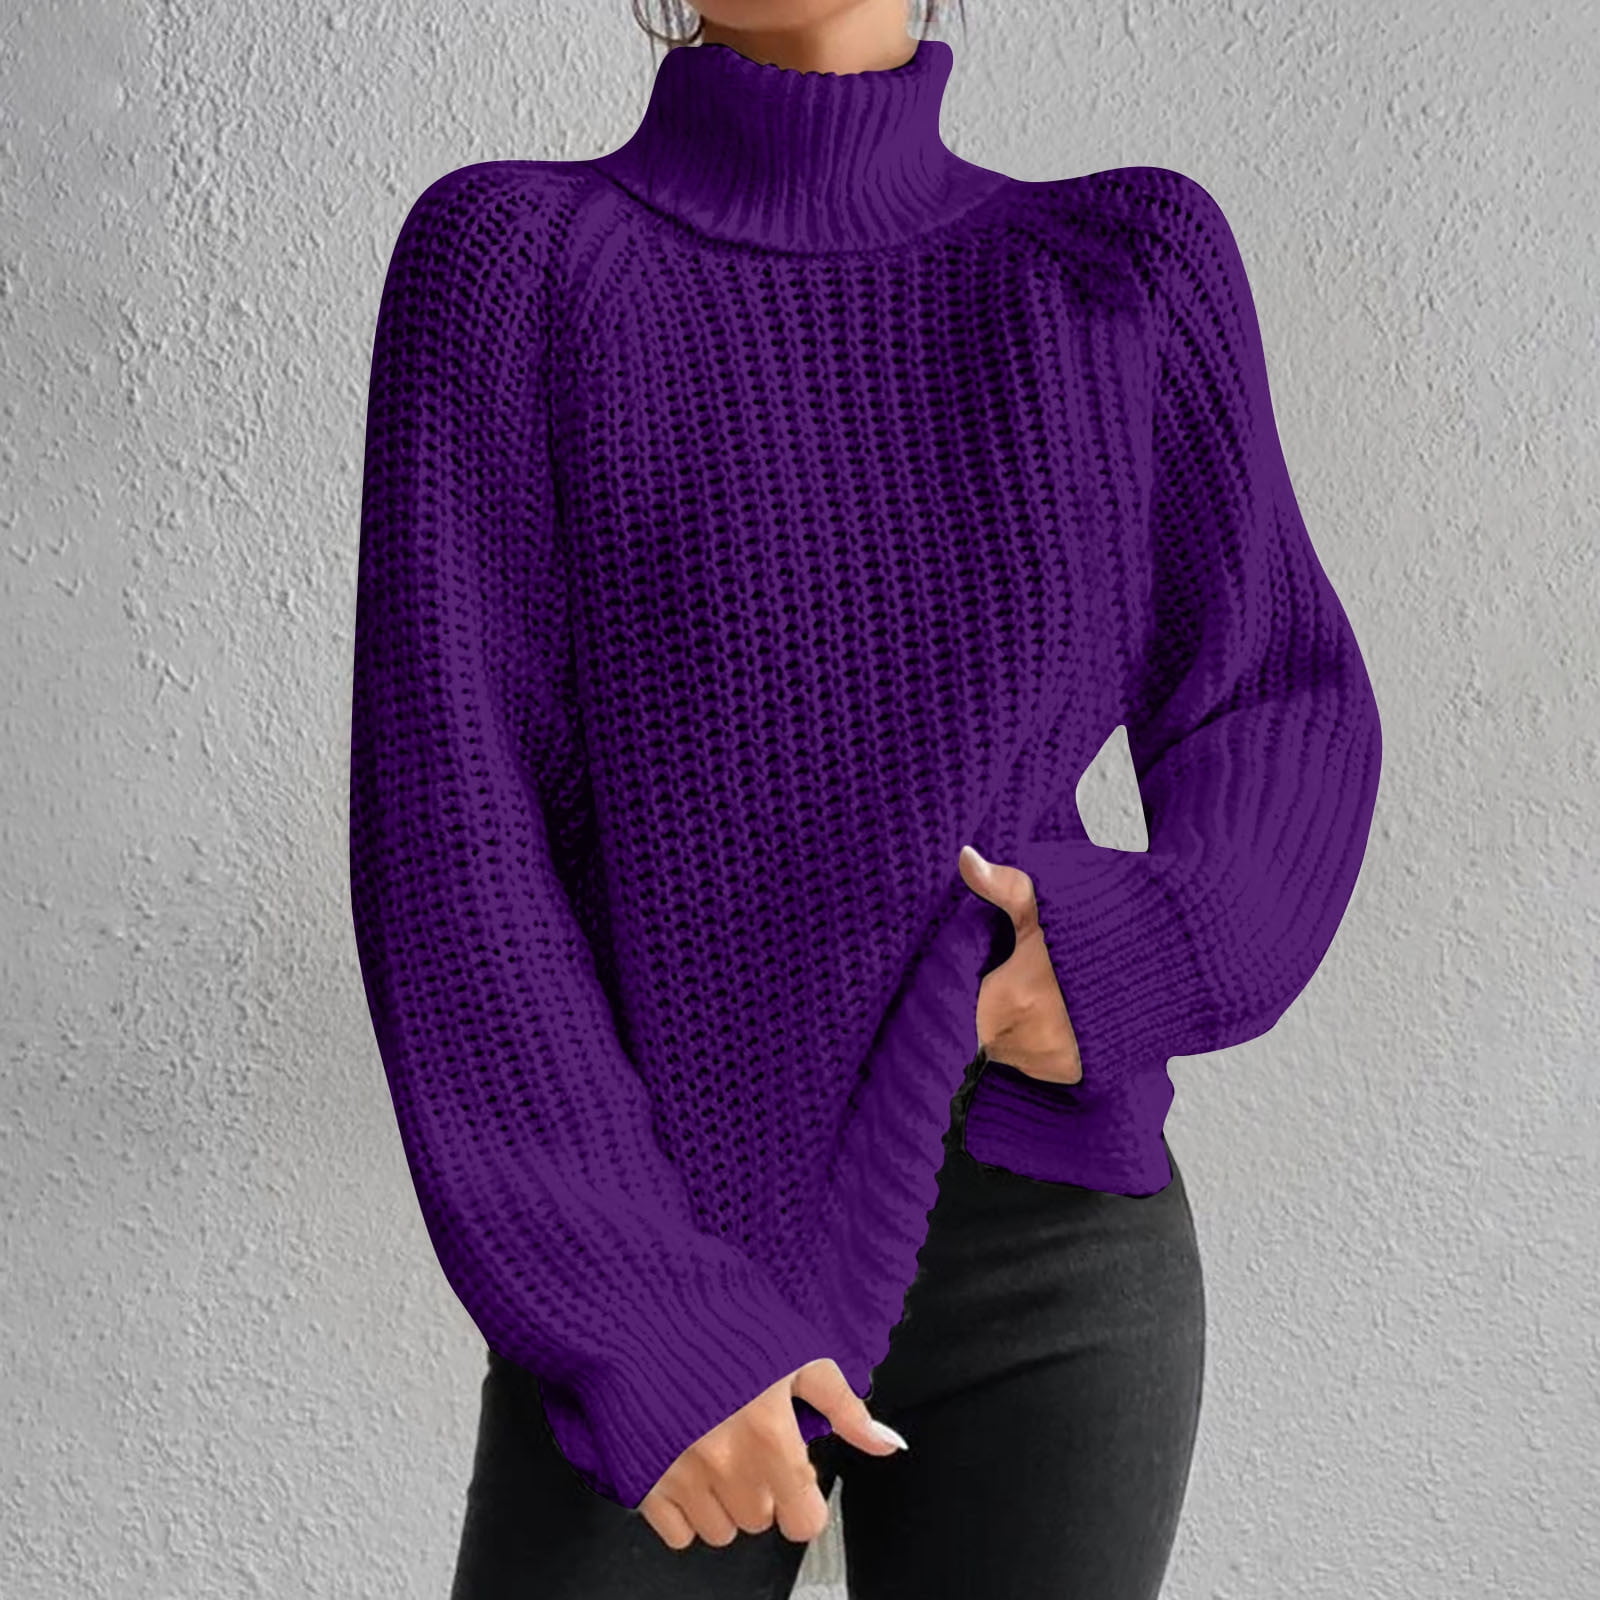 Bnwani Tunic Turtleneck Sweaters for Women Pullover Long Sleeve Solid ...